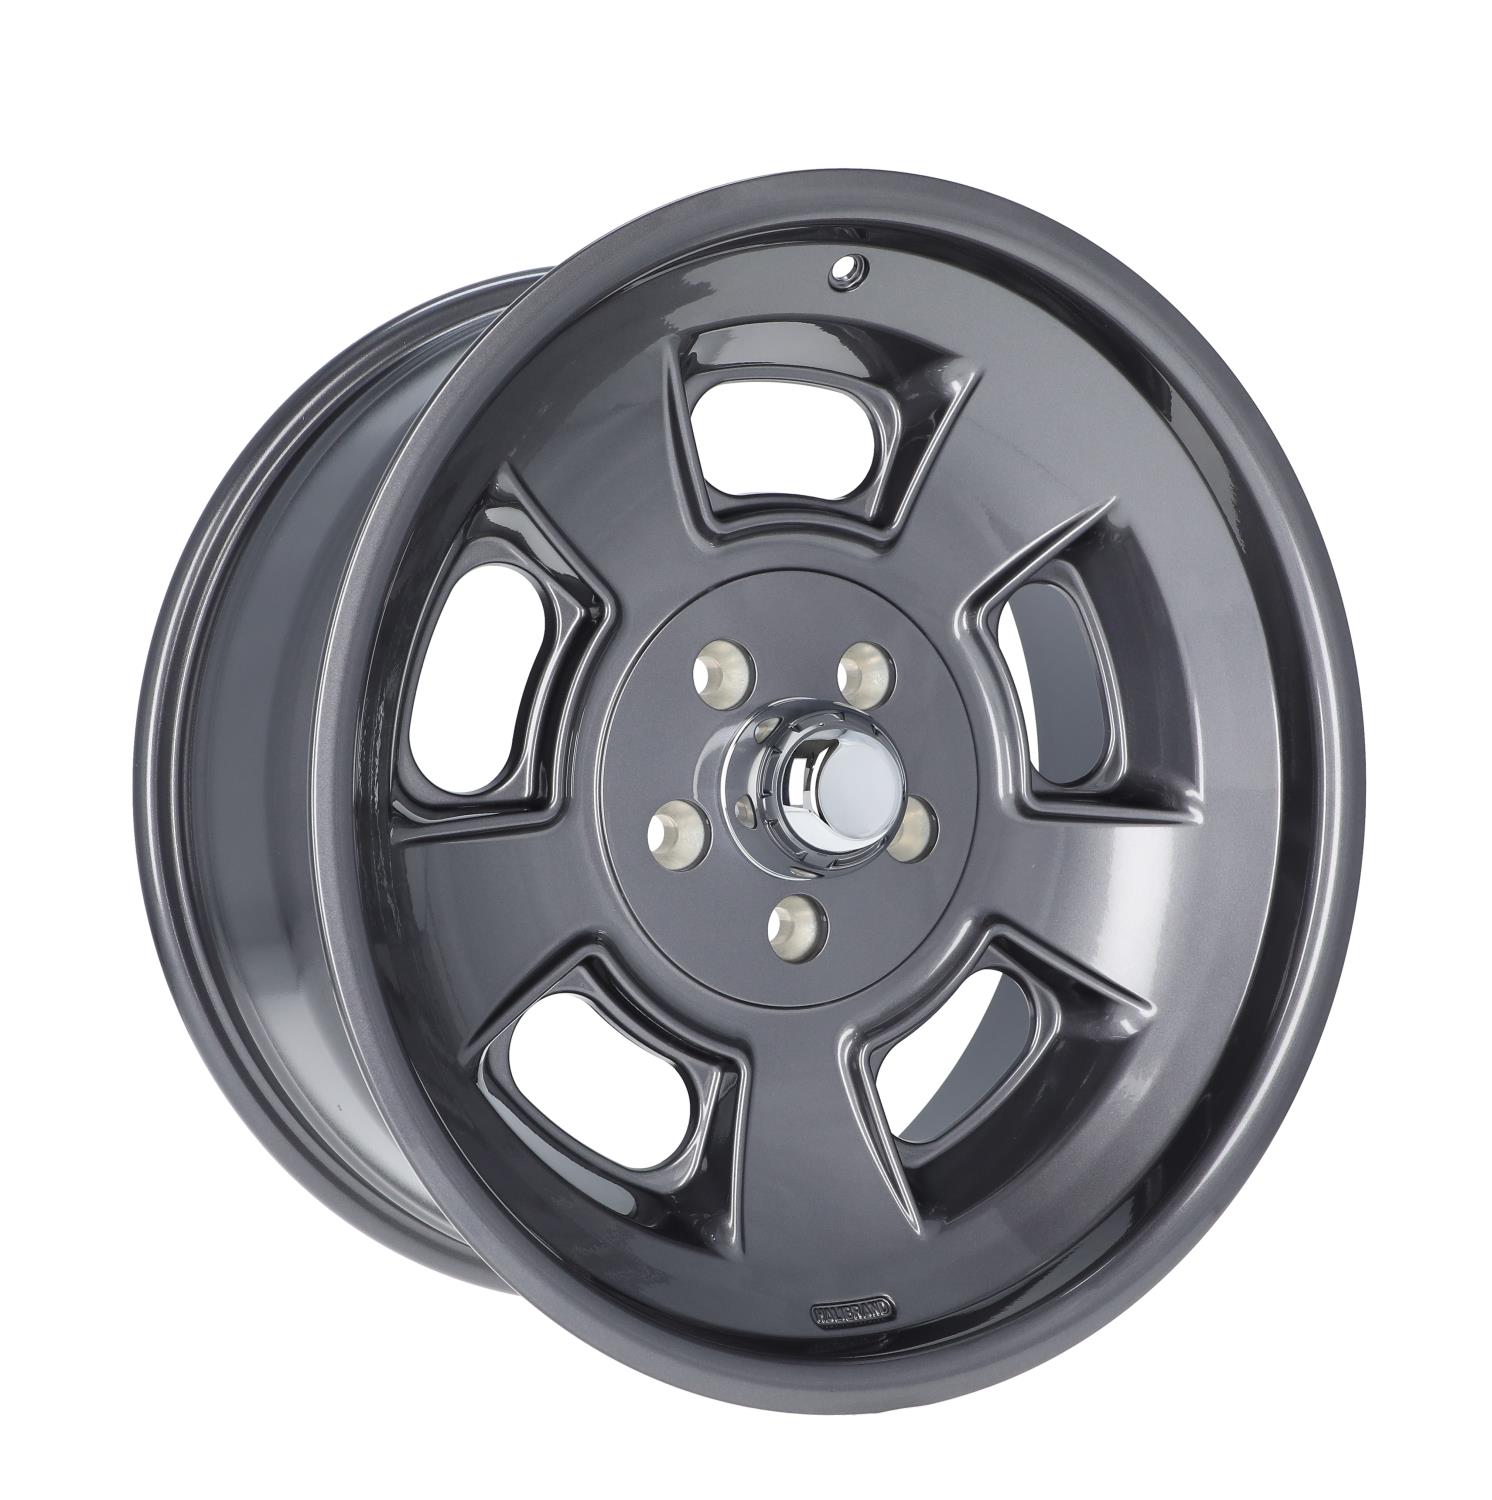 Sprint Front Wheel, Size: 19x8.5", Bolt Pattern: 5x5", Backspace: 4.75" [Anthracite - Gloss Clearcoat]